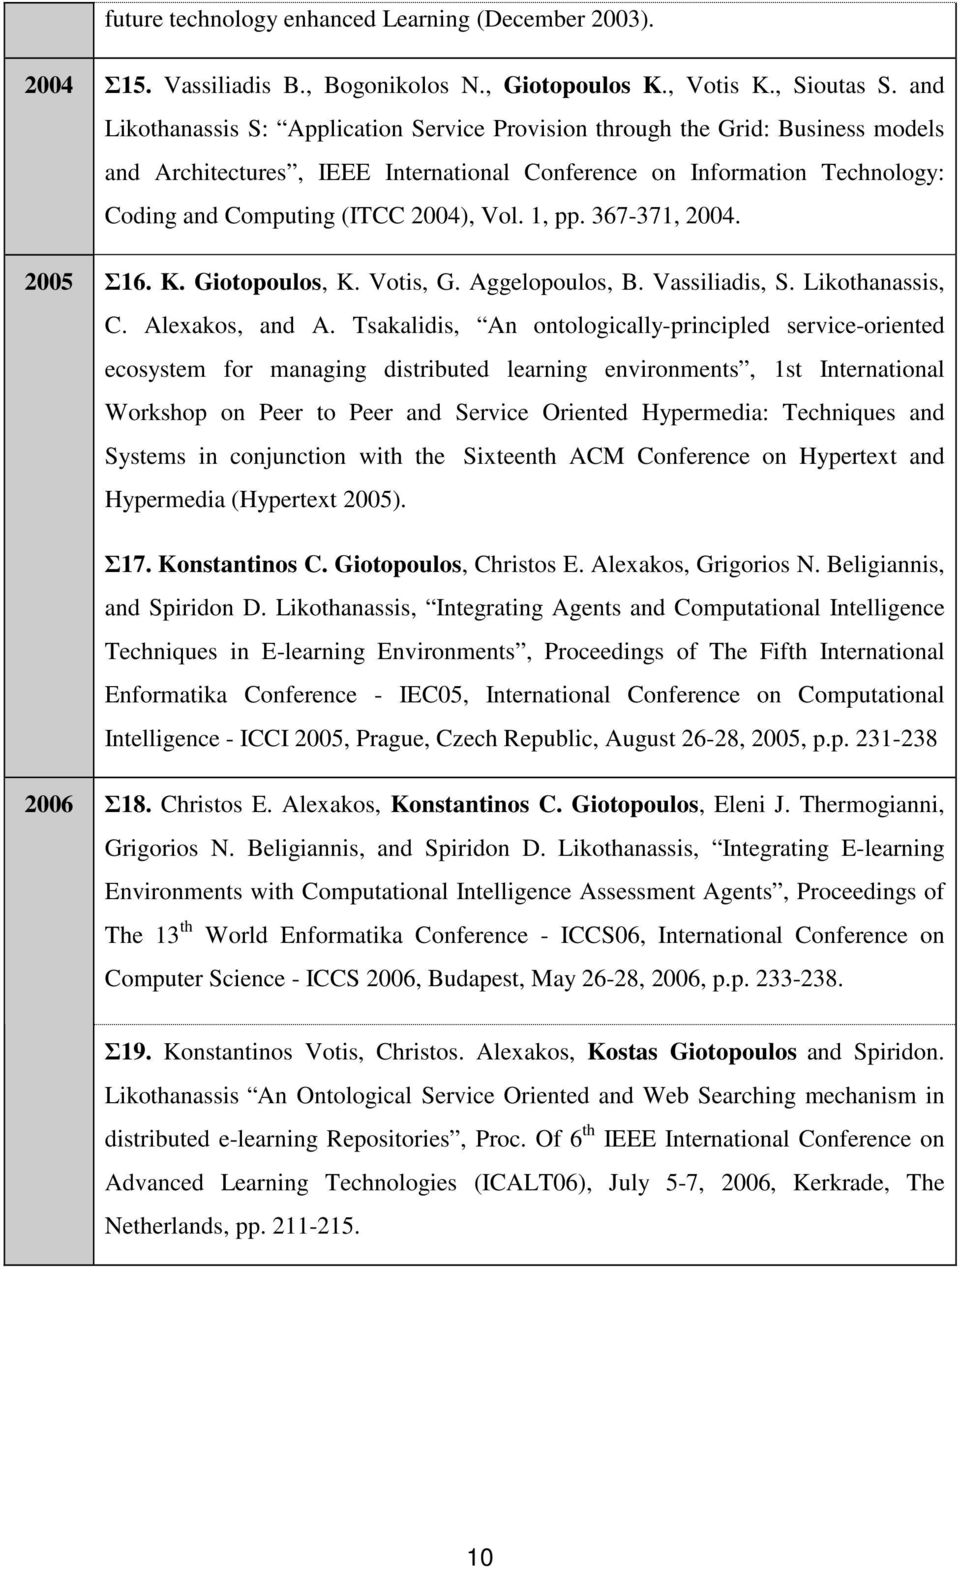 1, pp. 367-371, 2004. 2005 Σ16. K. Giotopoulos, K. Votis, G. Aggelopoulos, B. Vassiliadis, S. Likothanassis, C. Alexakos, and A.